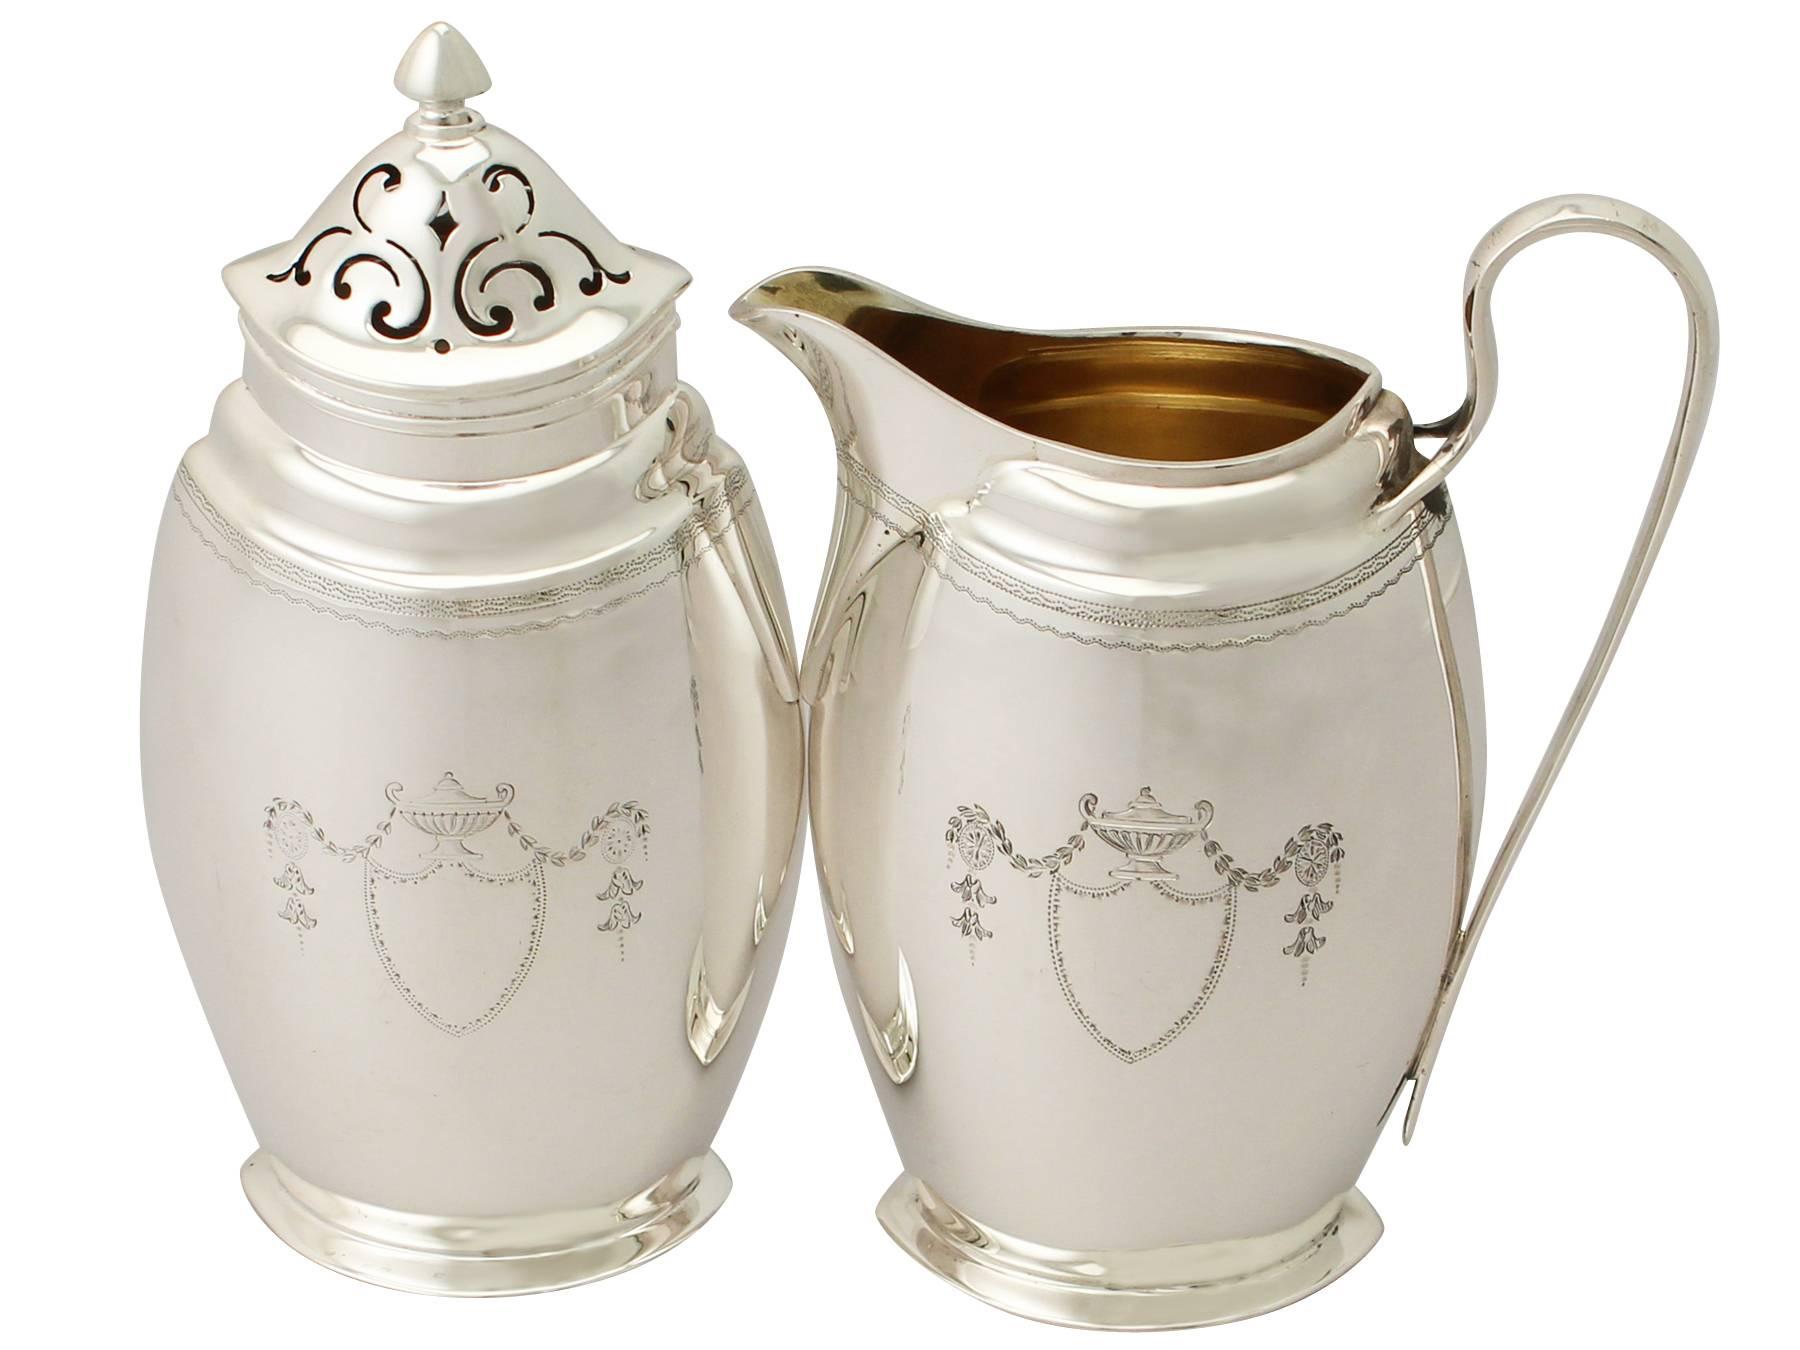 An exceptional, fine and impressive antique Edwardian English sterling silver creamer and sugar caster presentation set made by Edward Barnard & Sons Ltd. boxed; an addition to our antique teaware collection

This exceptional antique Edwardian